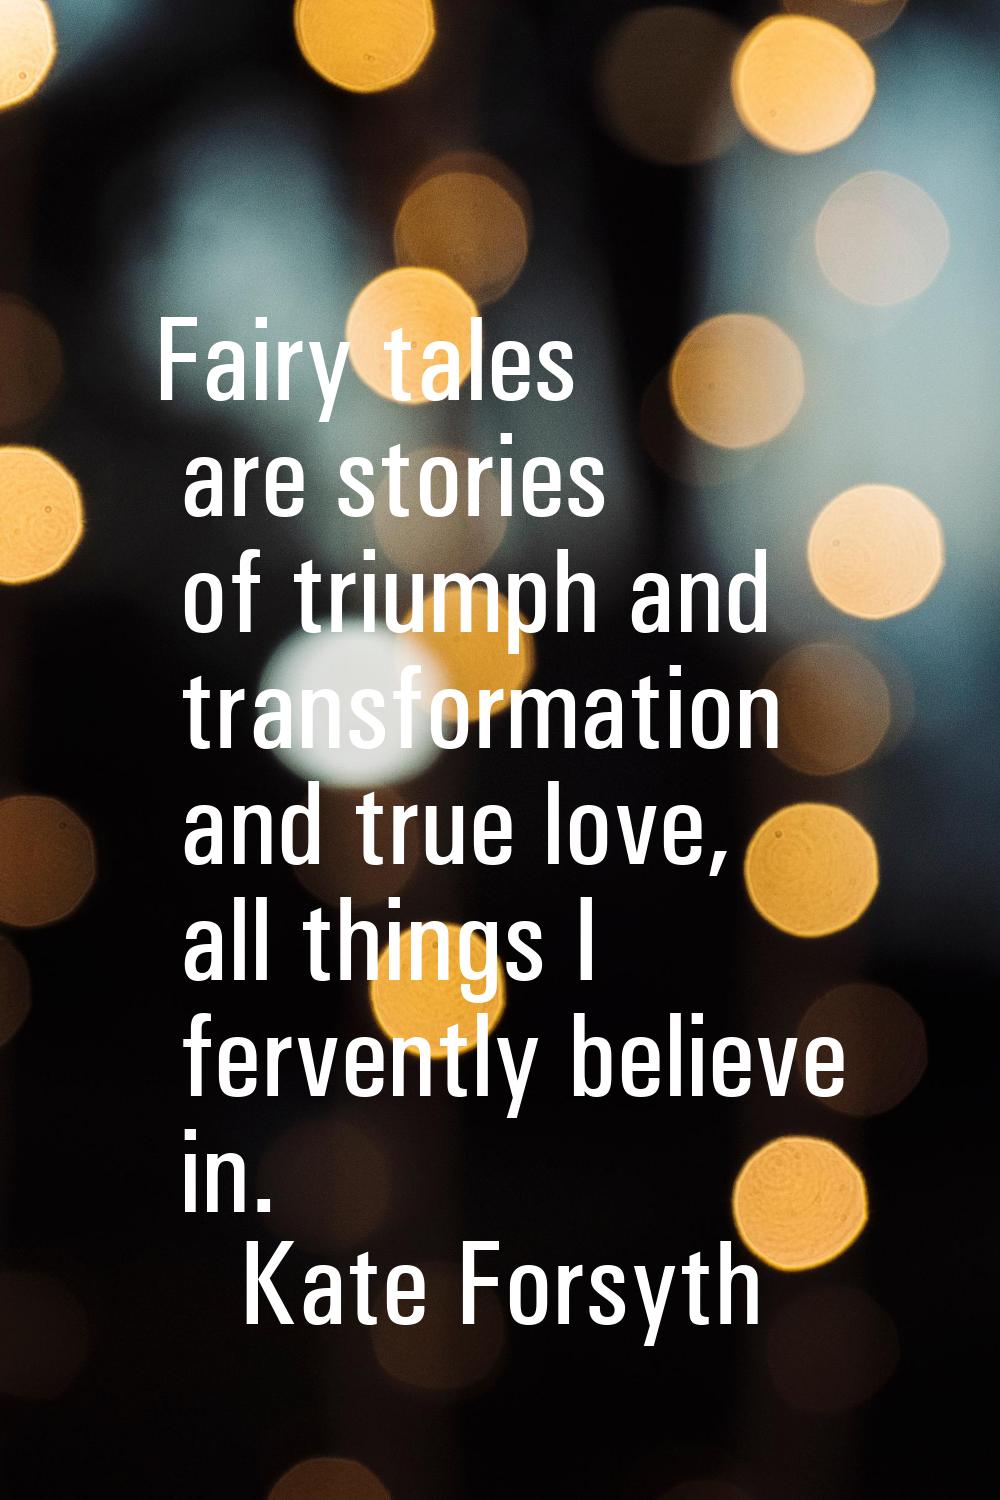 Fairy tales are stories of triumph and transformation and true love, all things I fervently believe